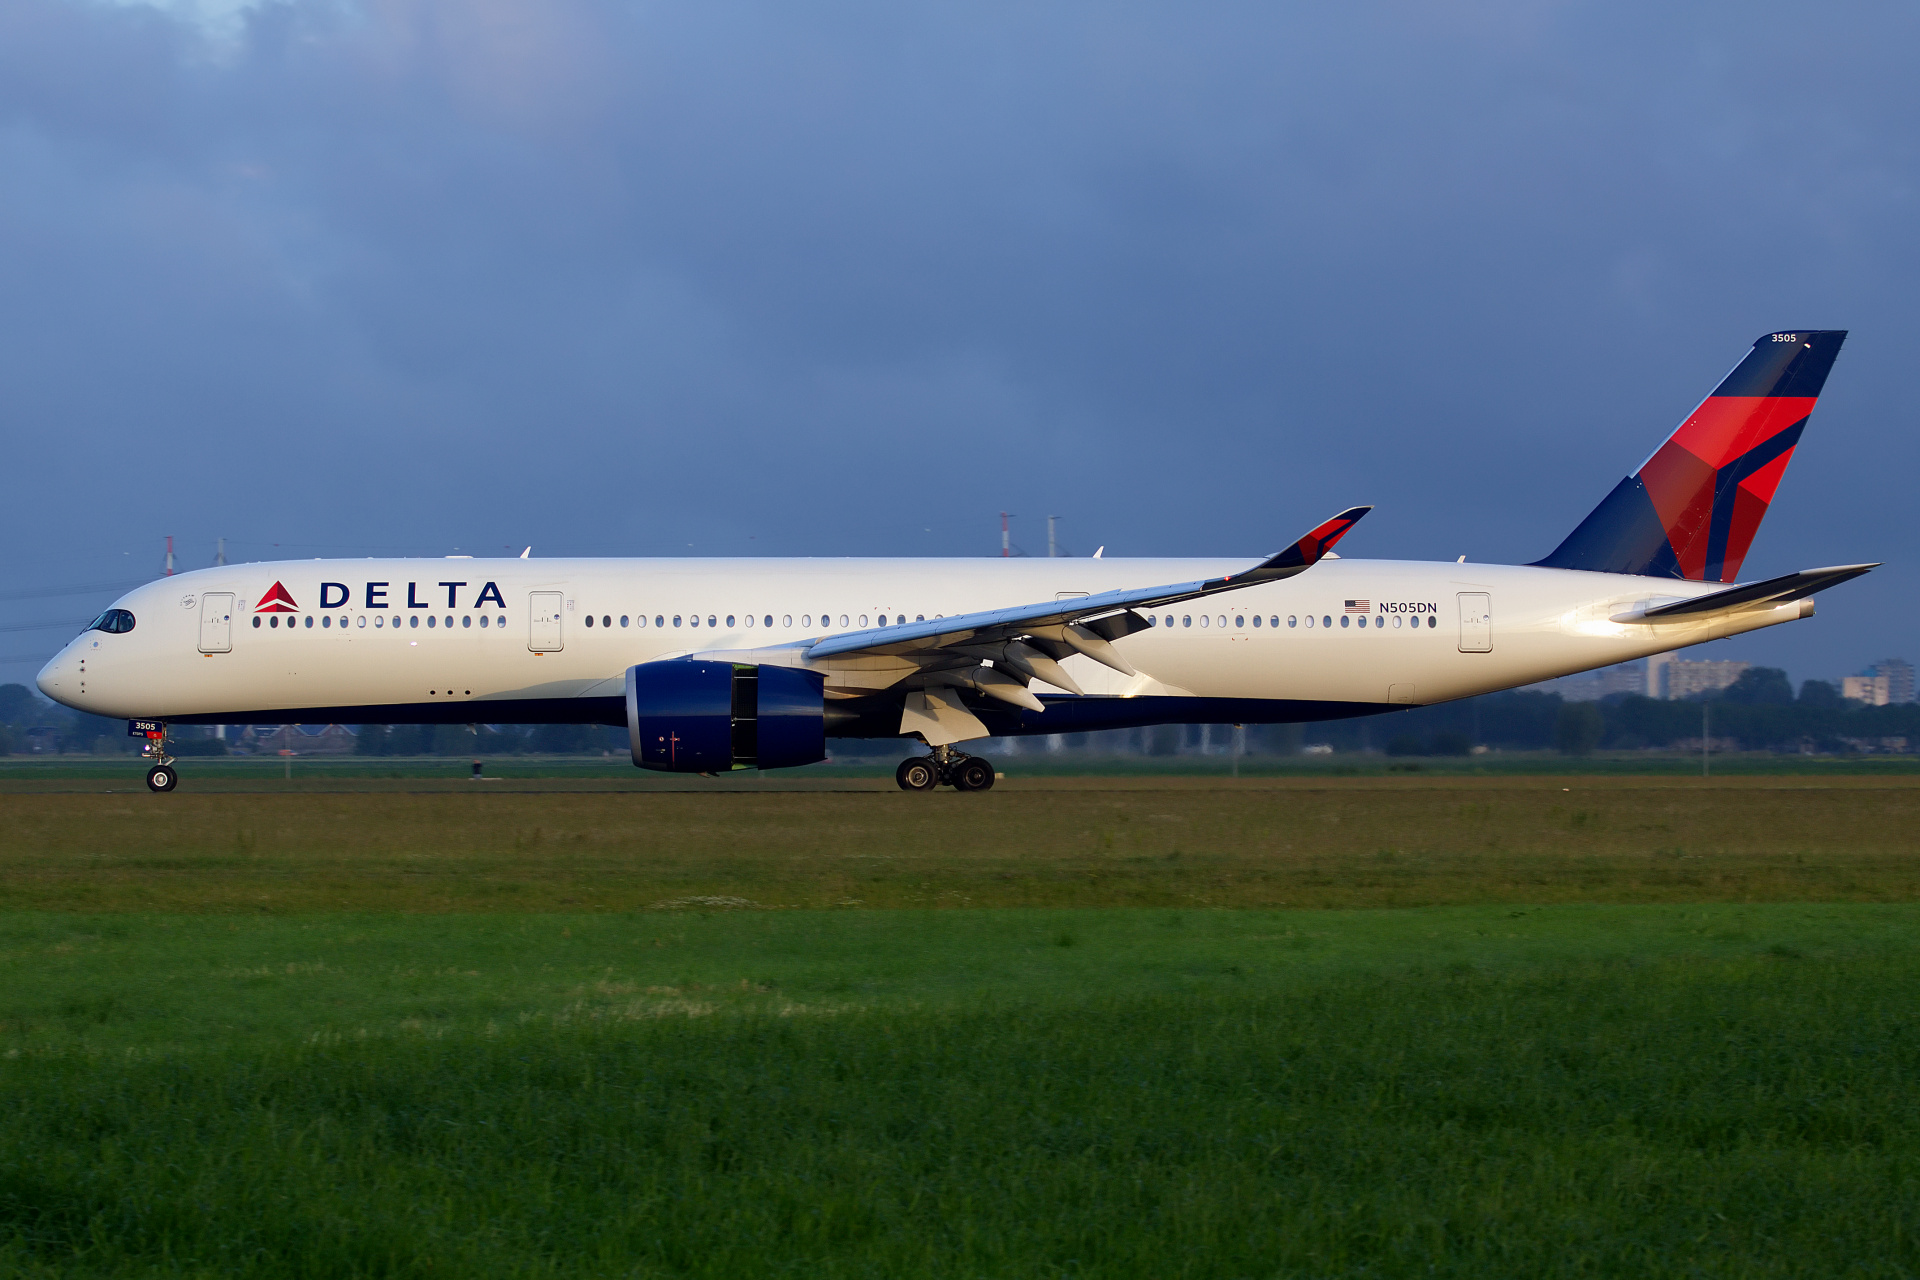 N505DN, Delta Airlines (Aircraft » Schiphol Spotting » Airbus A350-900 » Delta Airlines)